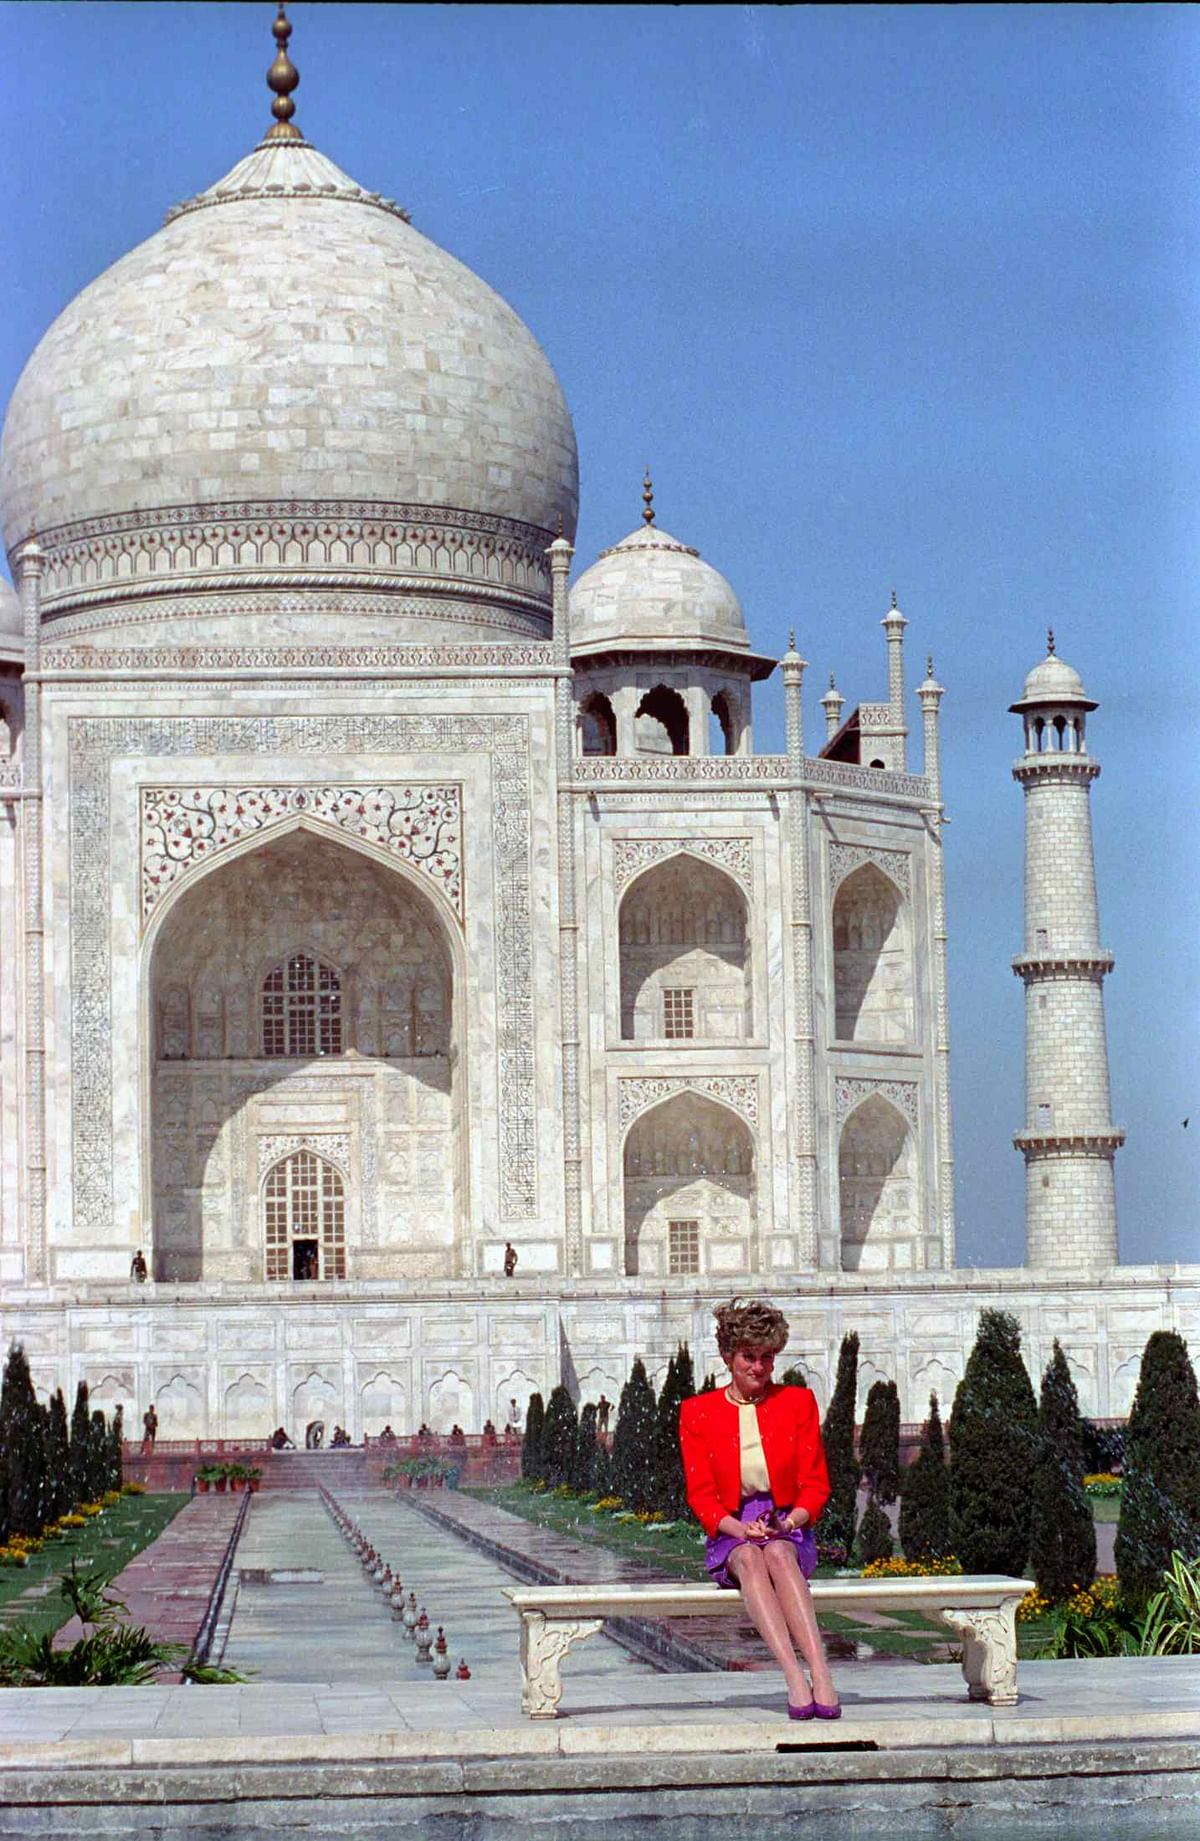 A throwback to Princess Diana’s visit to India and her famous photograph in front of the Taj